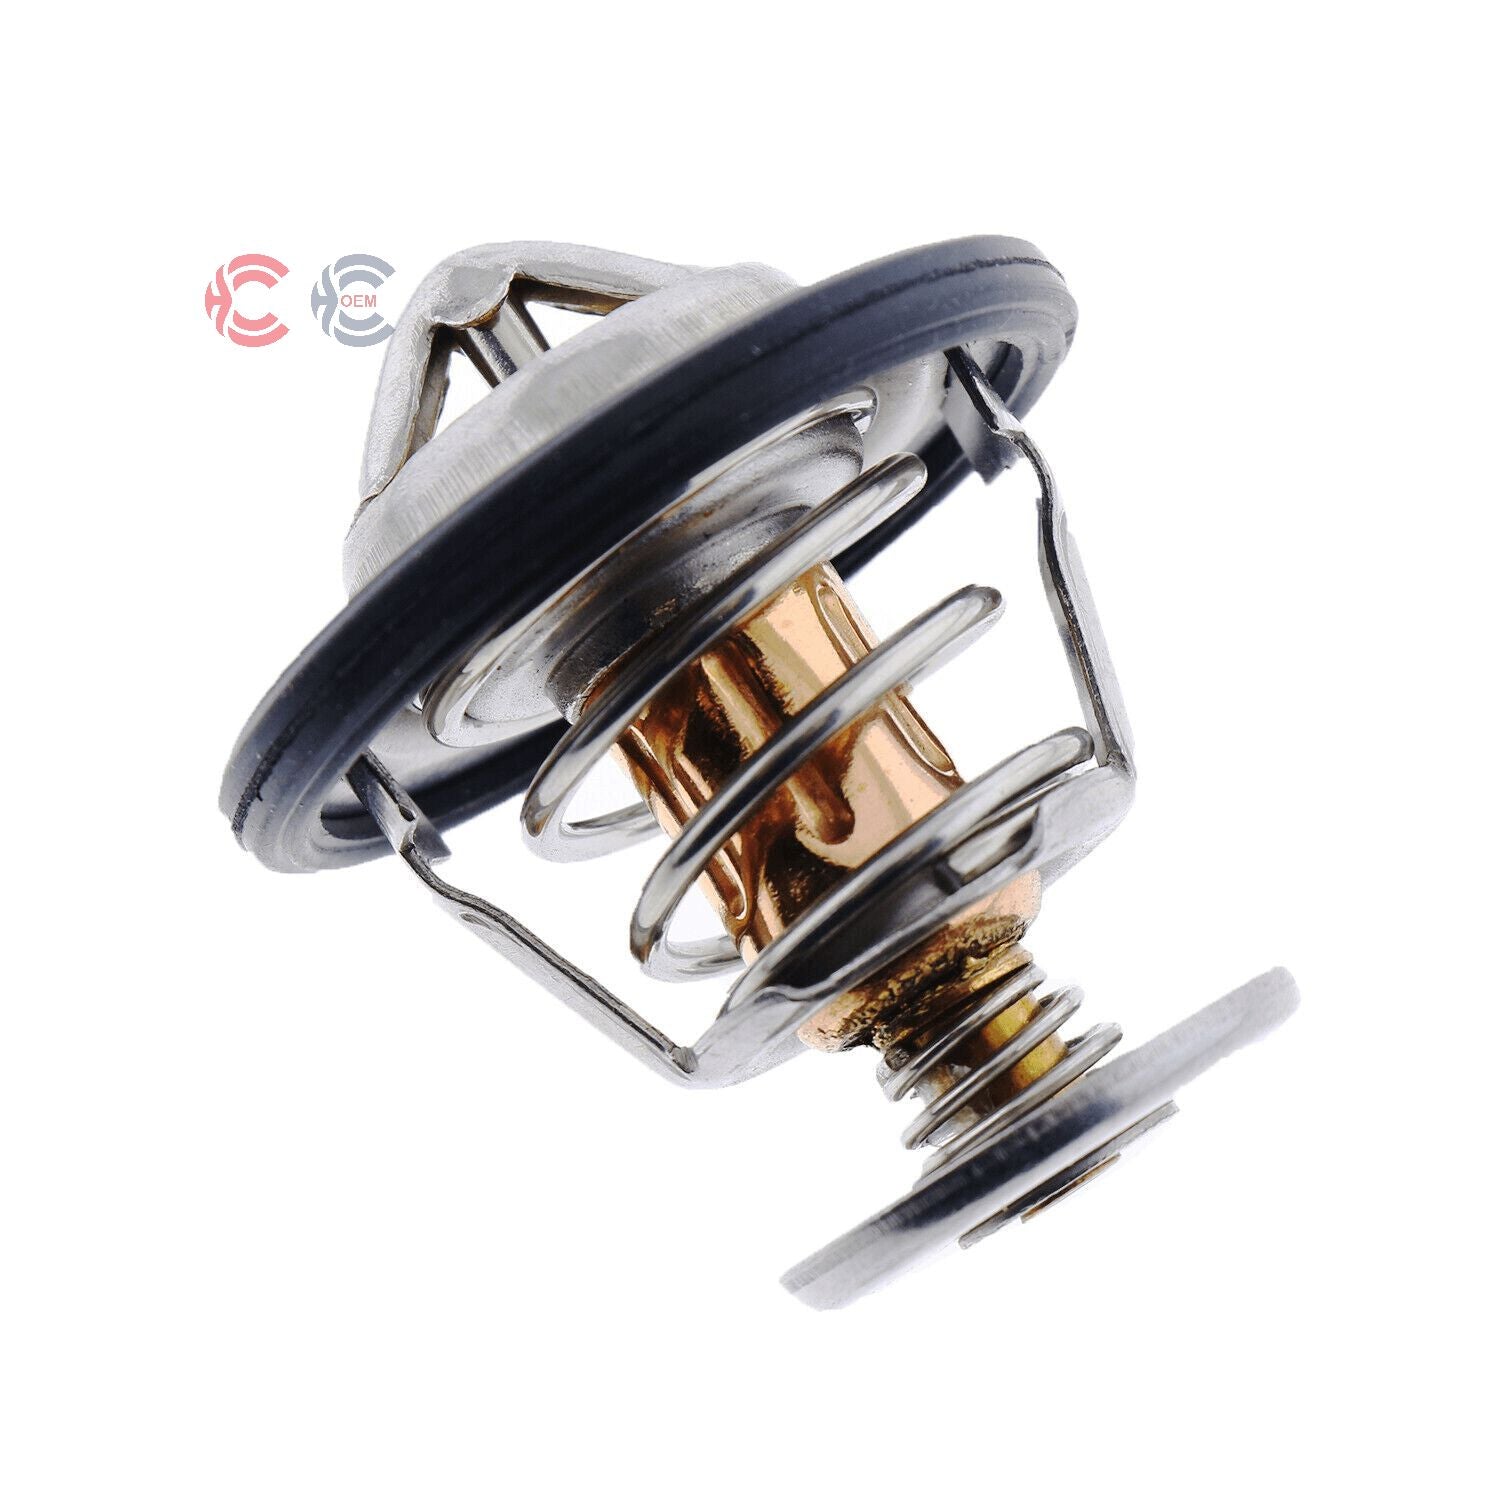 OEM: 129155-49801Material: ABS MetalColor: black silver goldenOrigin: Made in ChinaWeight: 200gPacking List: 1* Thermostat More ServiceWe can provide OEM Manufacturing serviceWe can Be your one-step solution for Auto PartsWe can provide technical scheme for you Feel Free to Contact Us, We will get back to you as soon as possible.